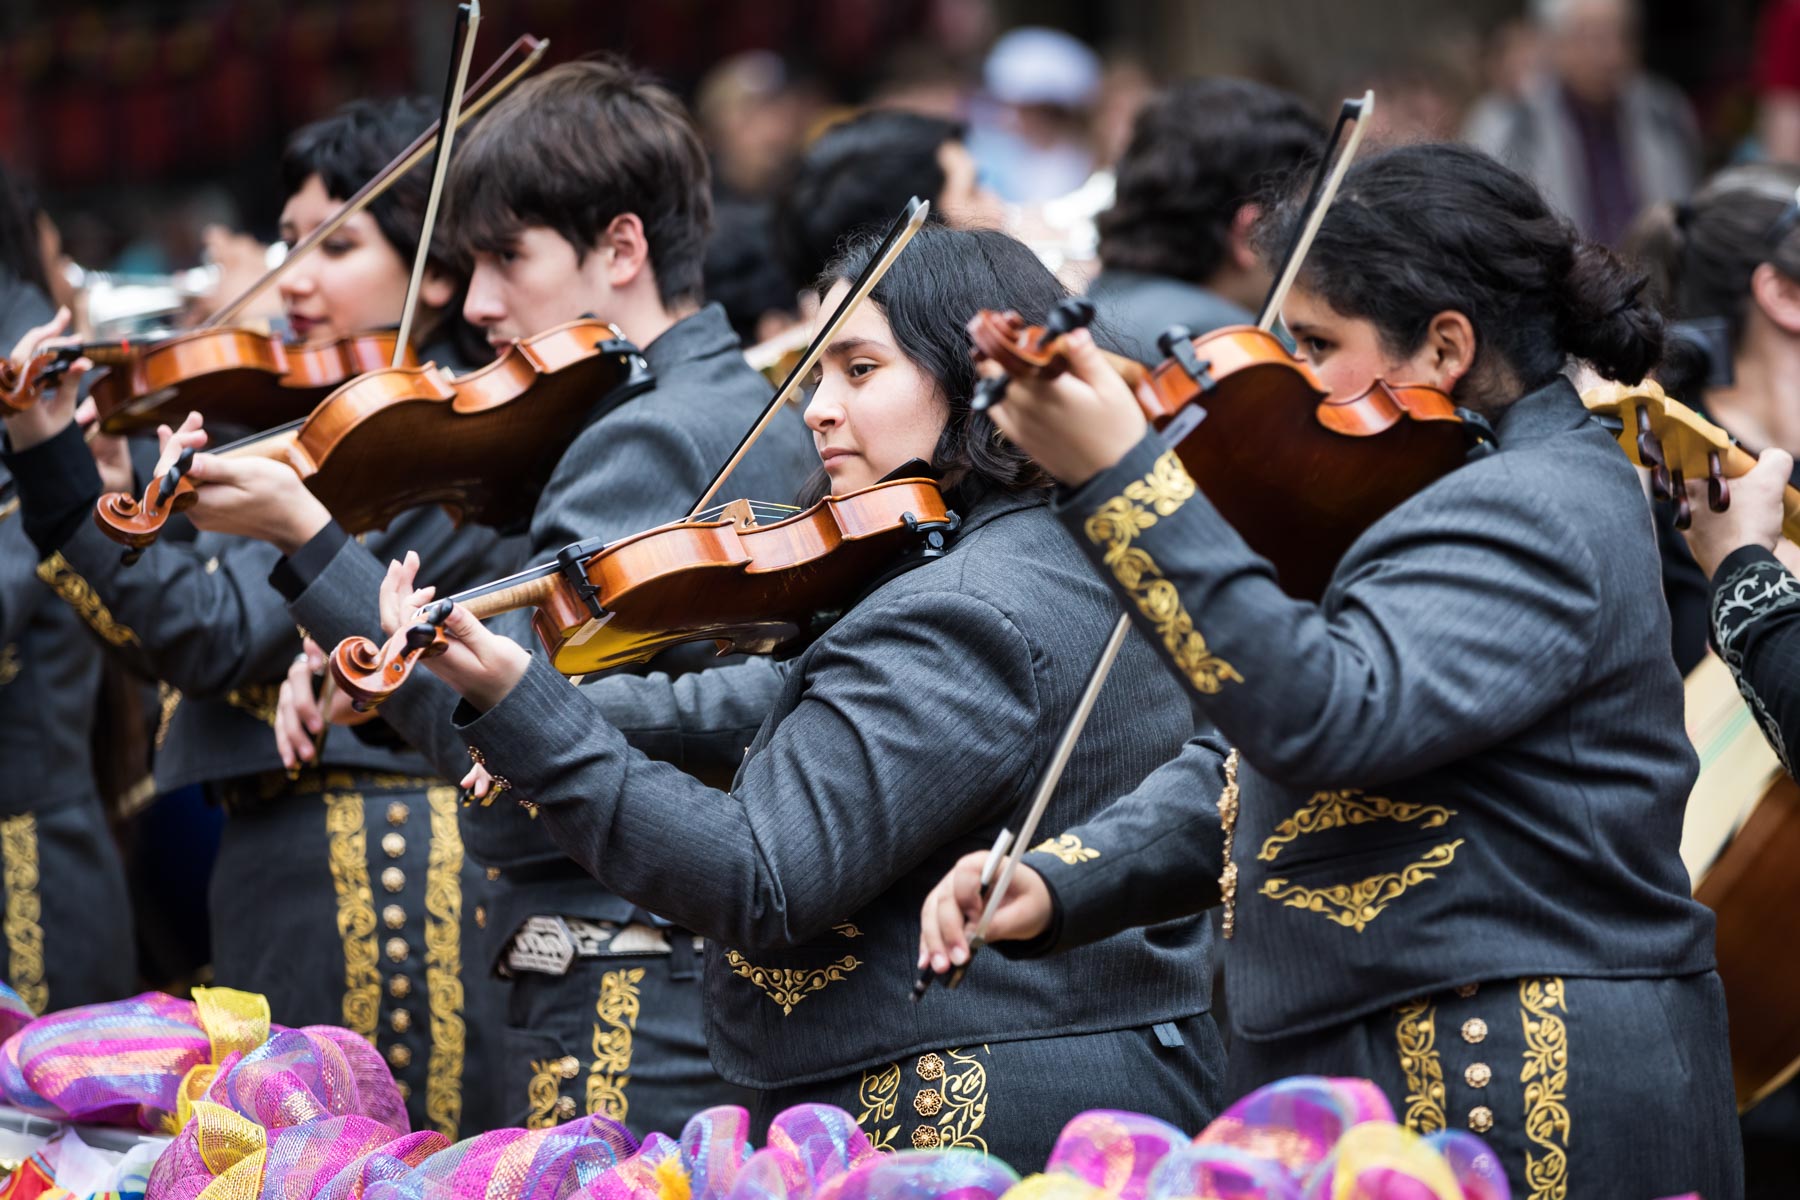 Mariachi musicians playing the violin for an article on the best Fiesta photos